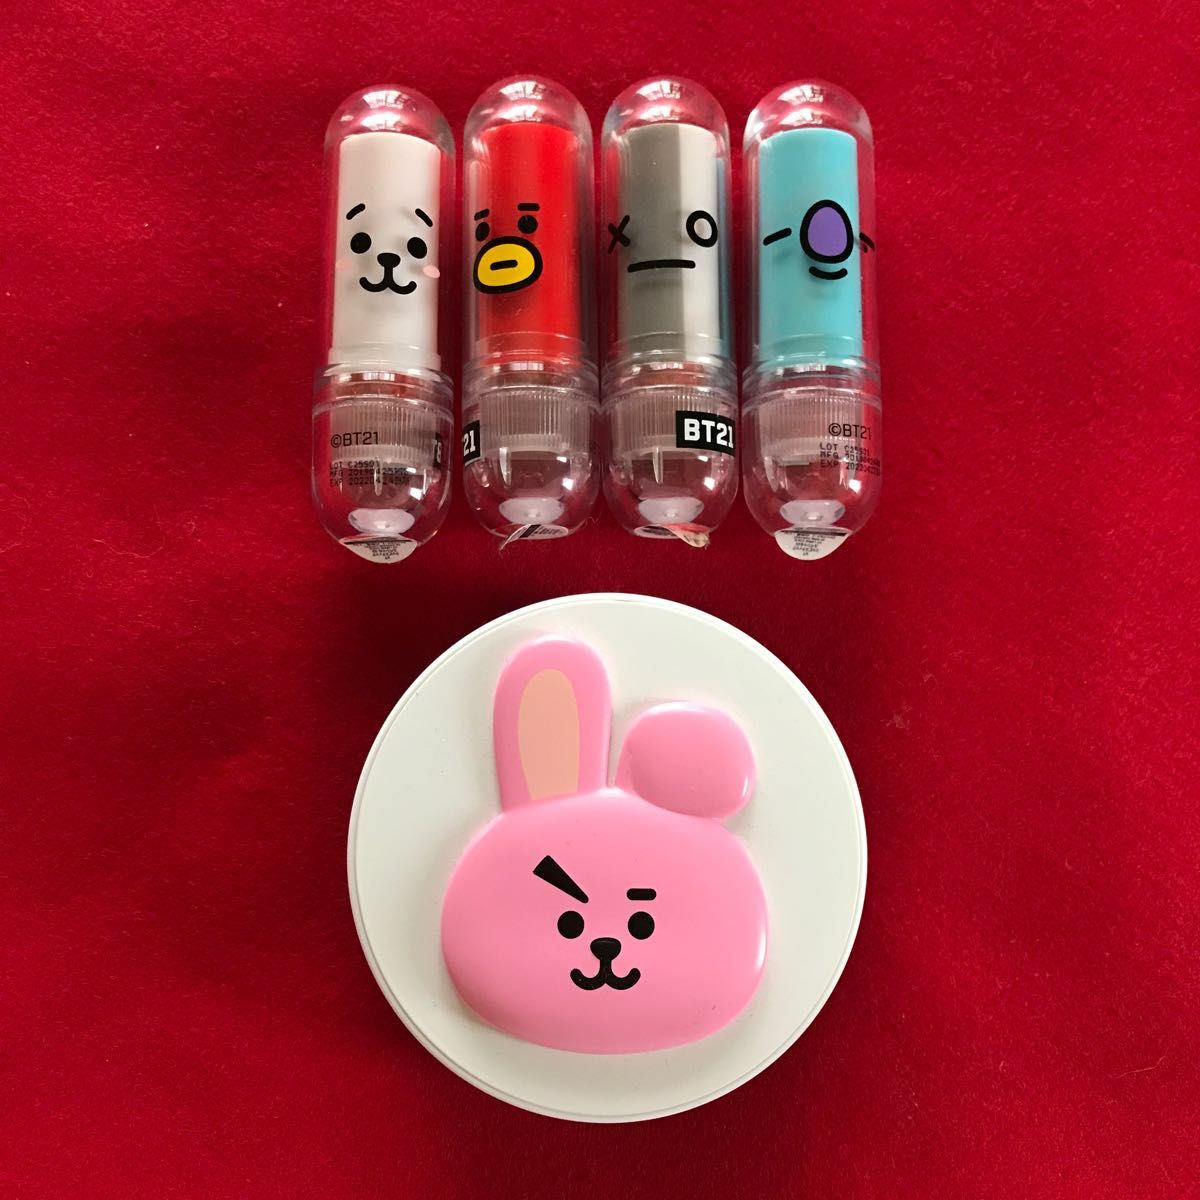 BT21 韓国コスメ　SPF50+/PA +++ パウダー　　　　　　　口紅　4本　　5 点セット